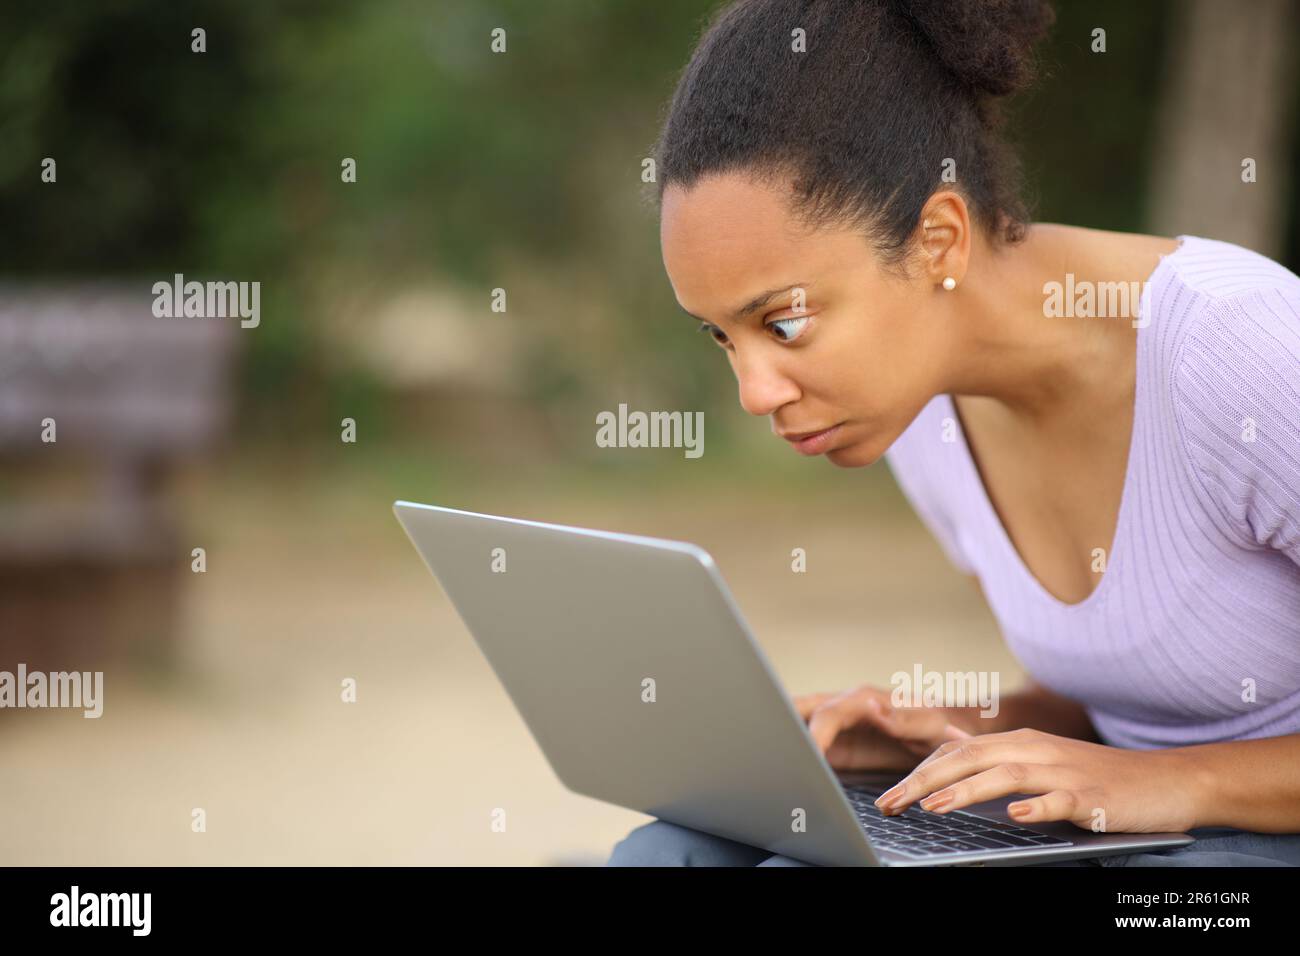 Shocked black woman checking laptop content sitting in a park Stock Photo